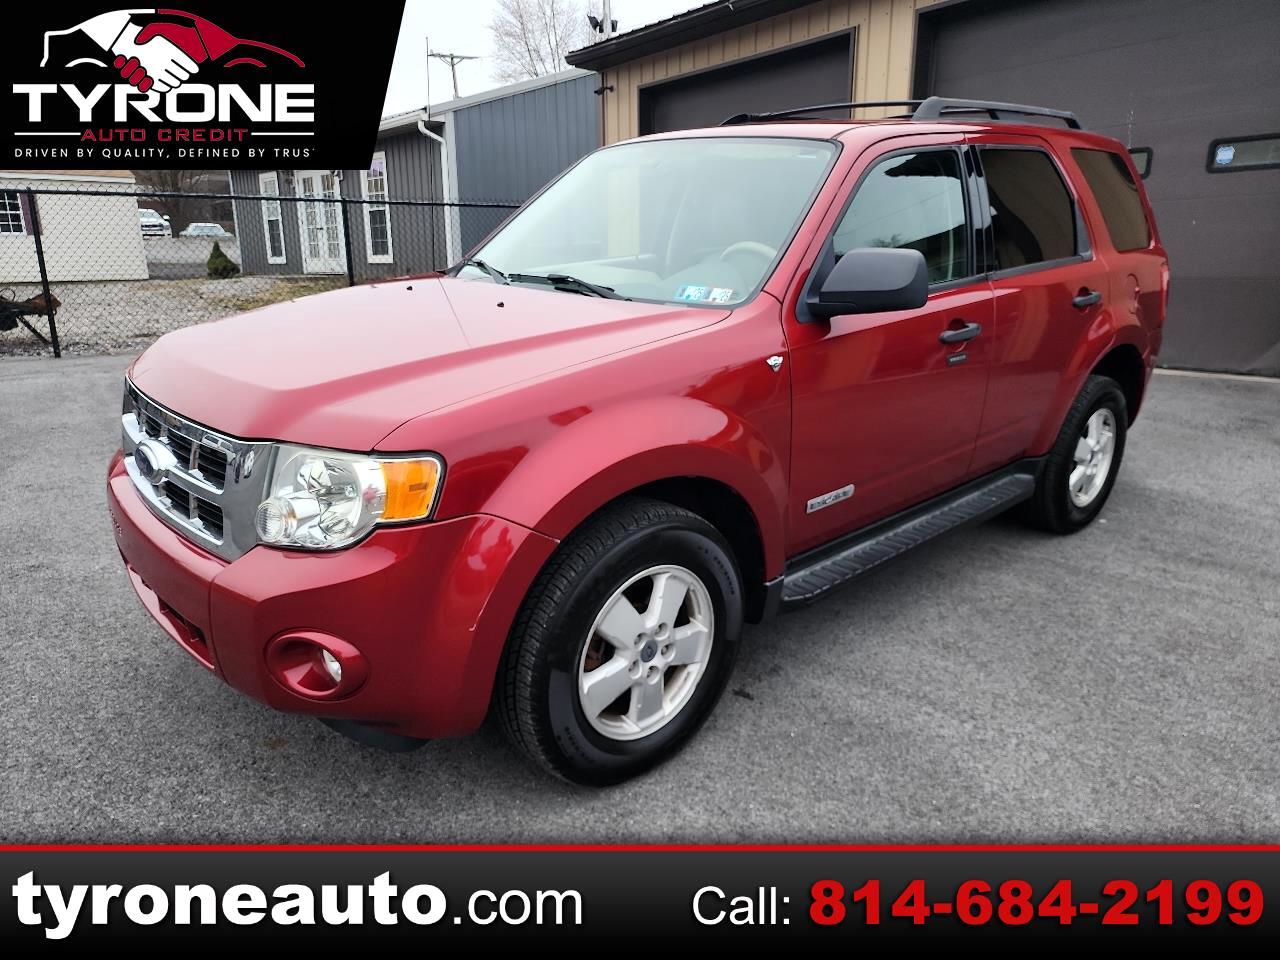 2008 Ford Escape XLT 4WD V6